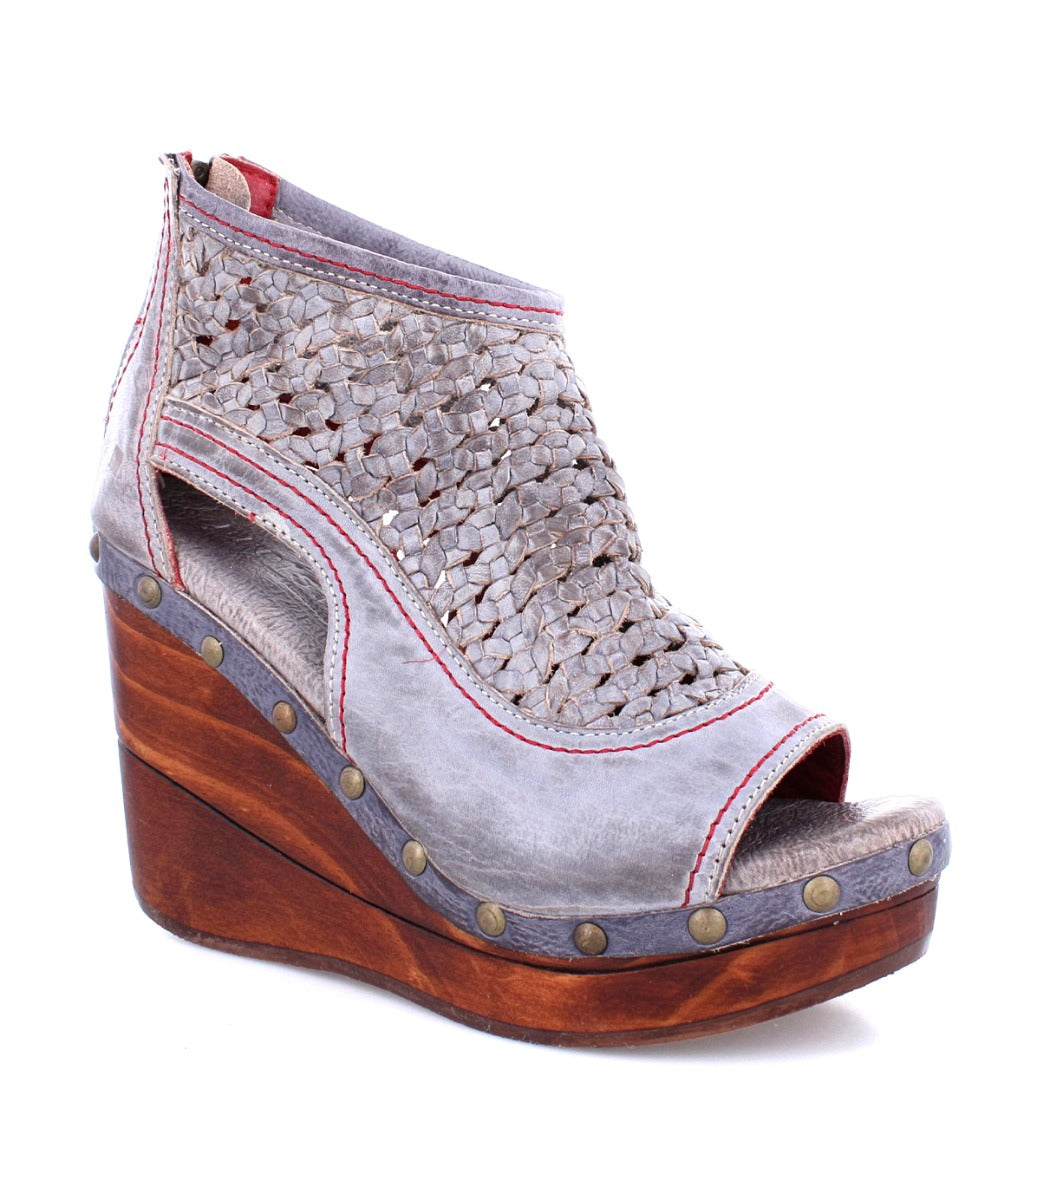 A women's grey wedge sandal with a wooden platform, the Odette by Bed Stu.